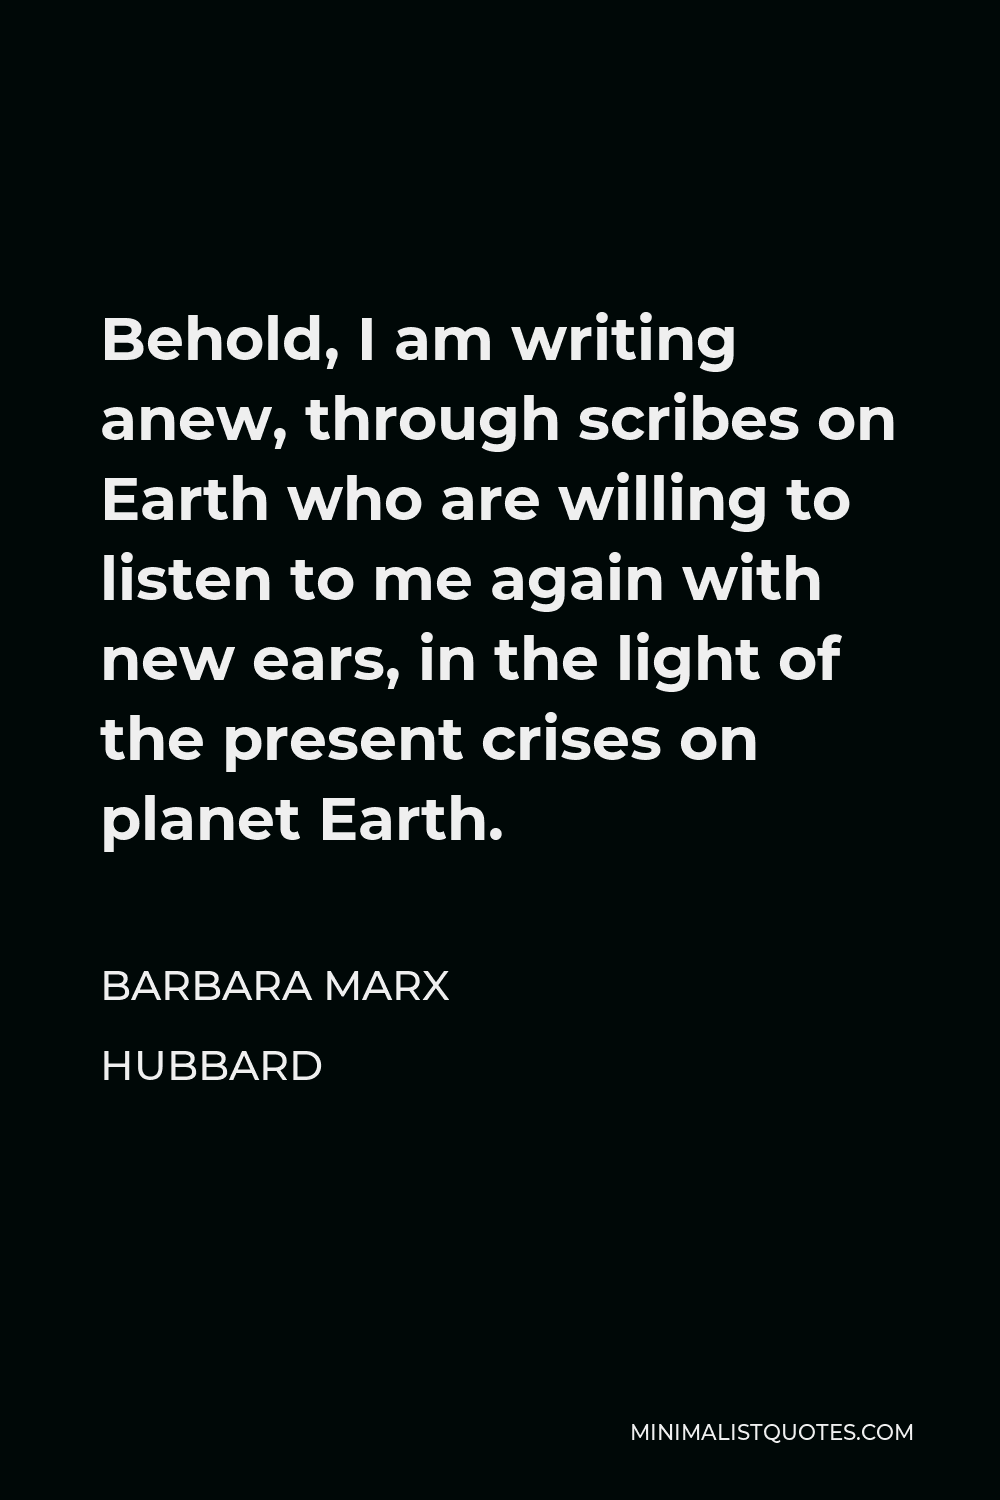 Barbara Marx Hubbard Quote - Behold, I am writing anew, through scribes on Earth who are willing to listen to me again with new ears, in the light of the present crises on planet Earth.